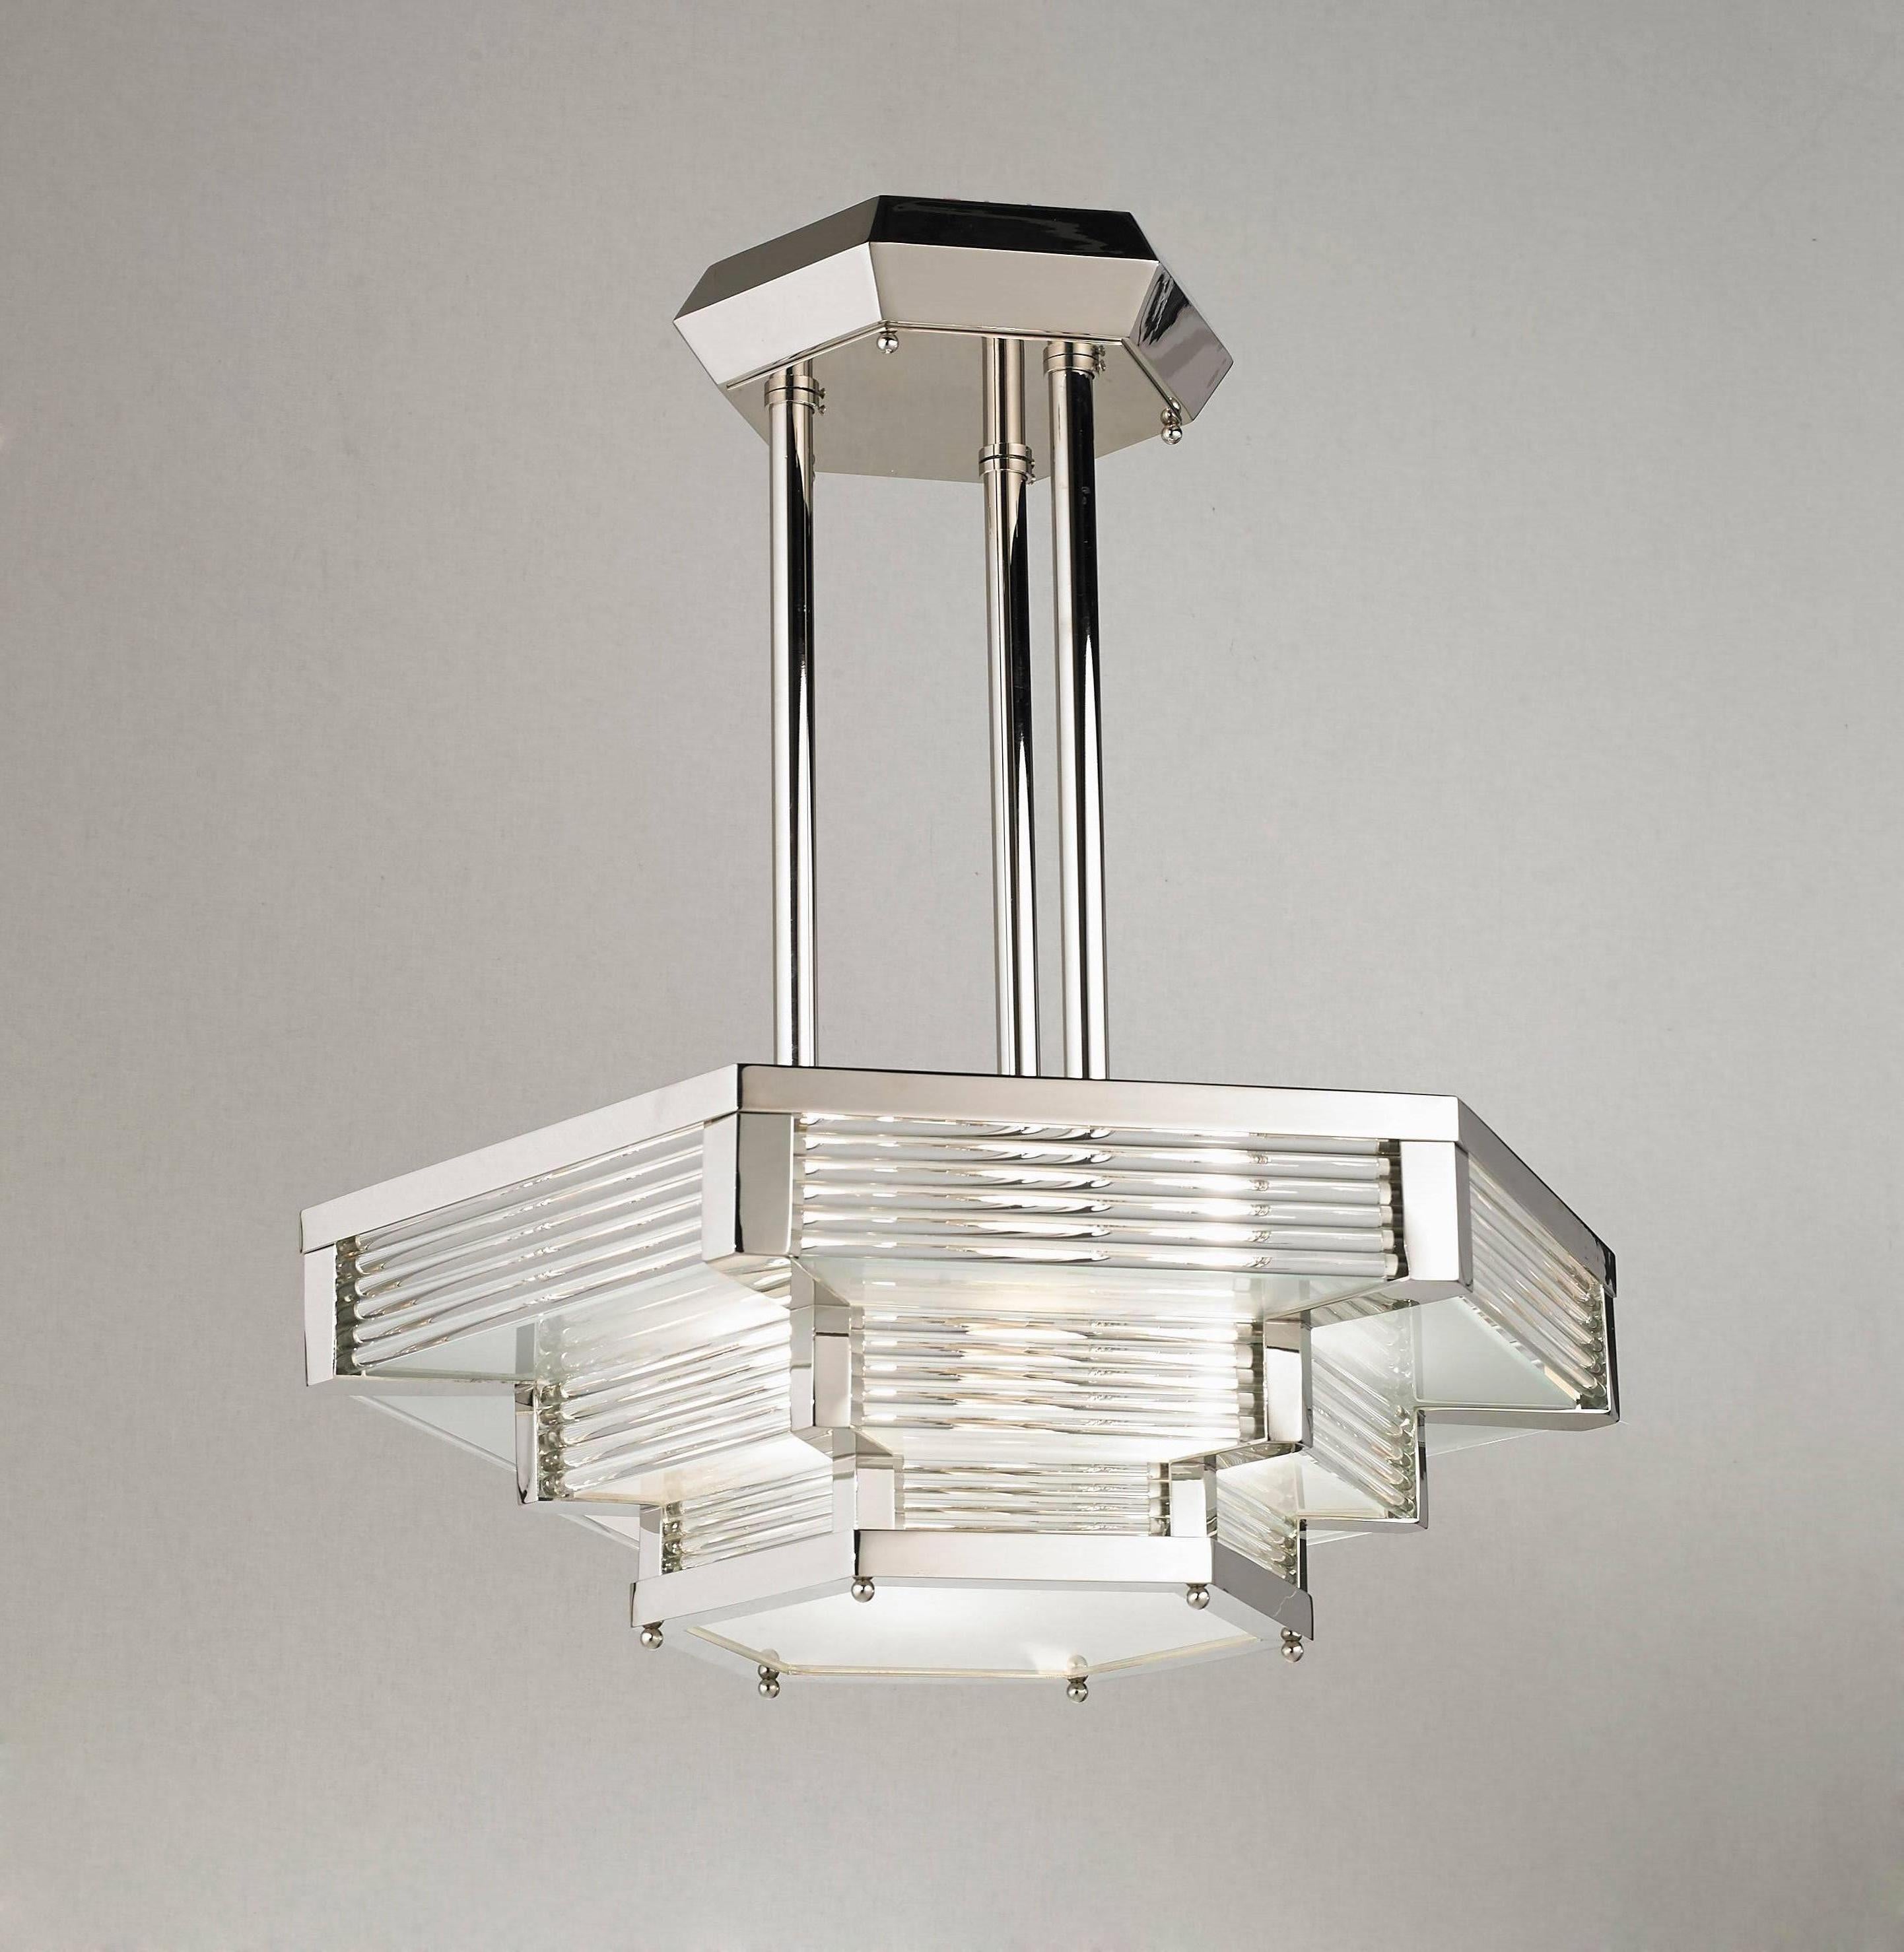 Art Deco chandelier with nickel finish and glass rods.